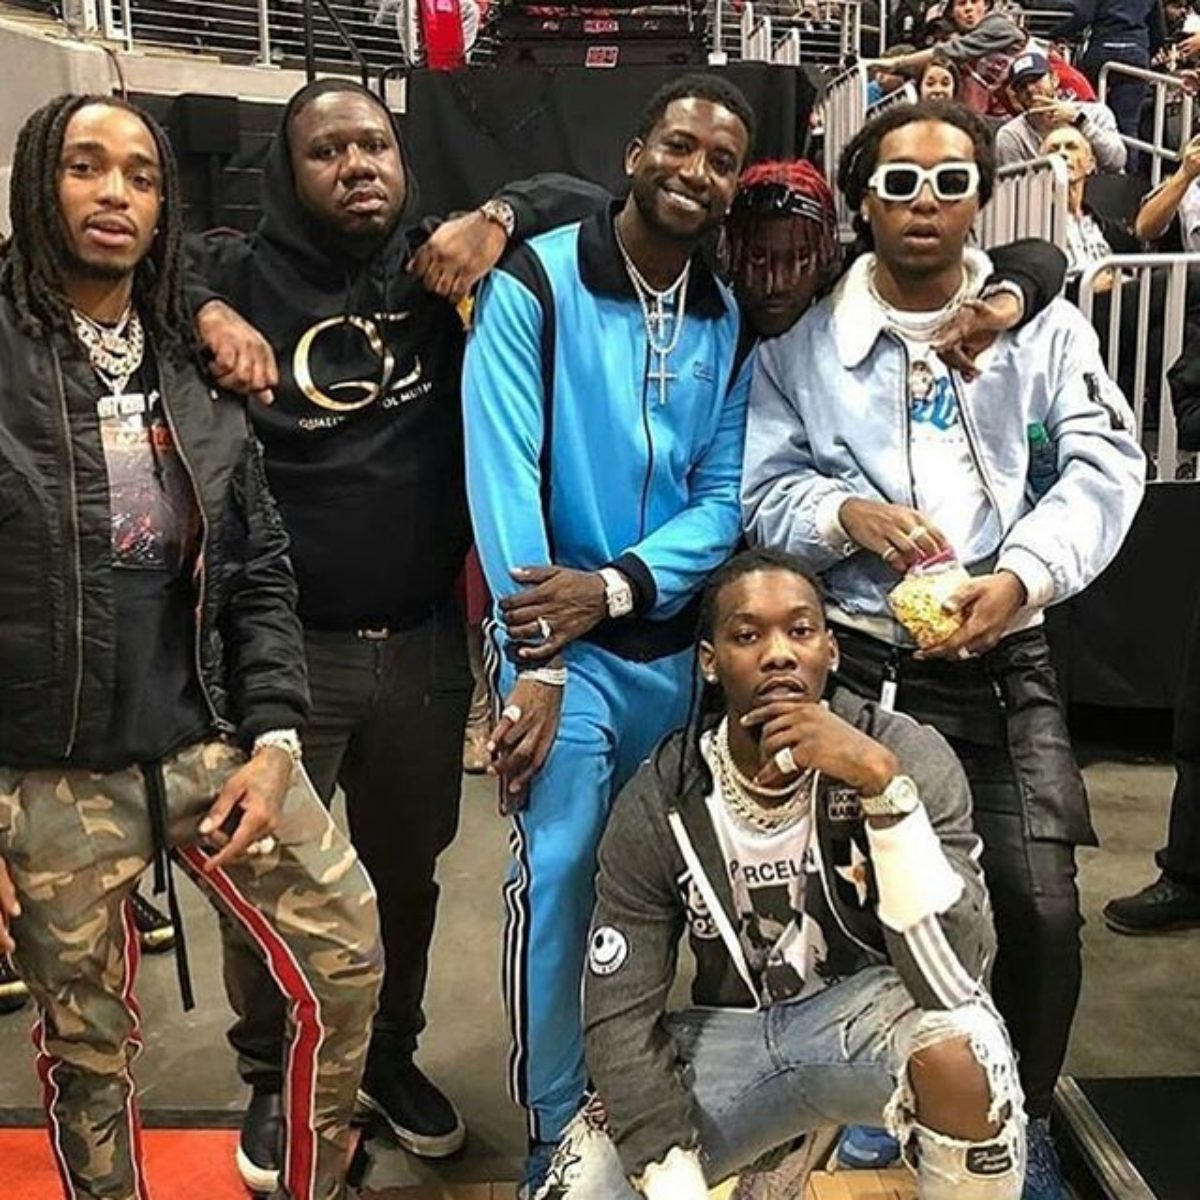 chef smag episode Gucci Mane, Migos & Lil Yachty To Release 'Glacier Boyz' Album This Month |  HipHop-N-More